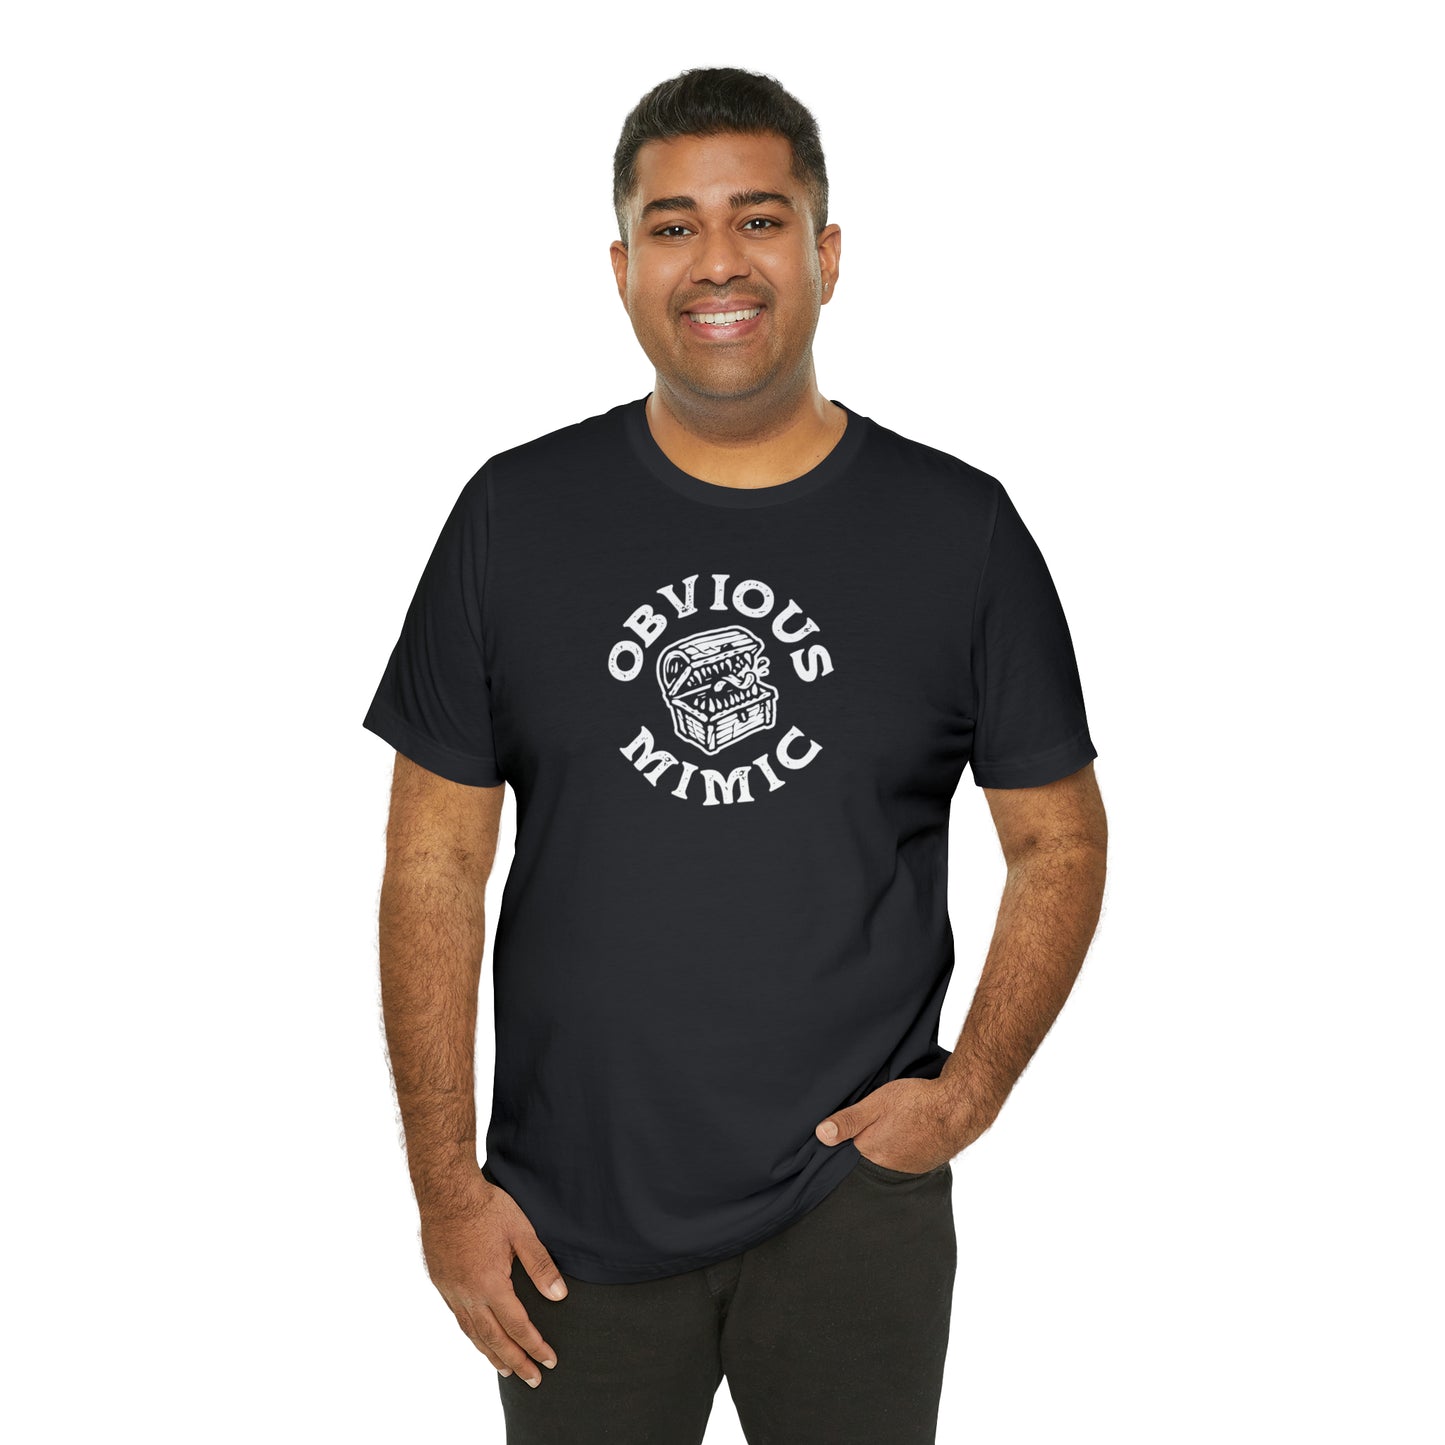 Classic Mimic Retail Fit Fantasy Geek T-shirt | Obvious Mimic Official Collection